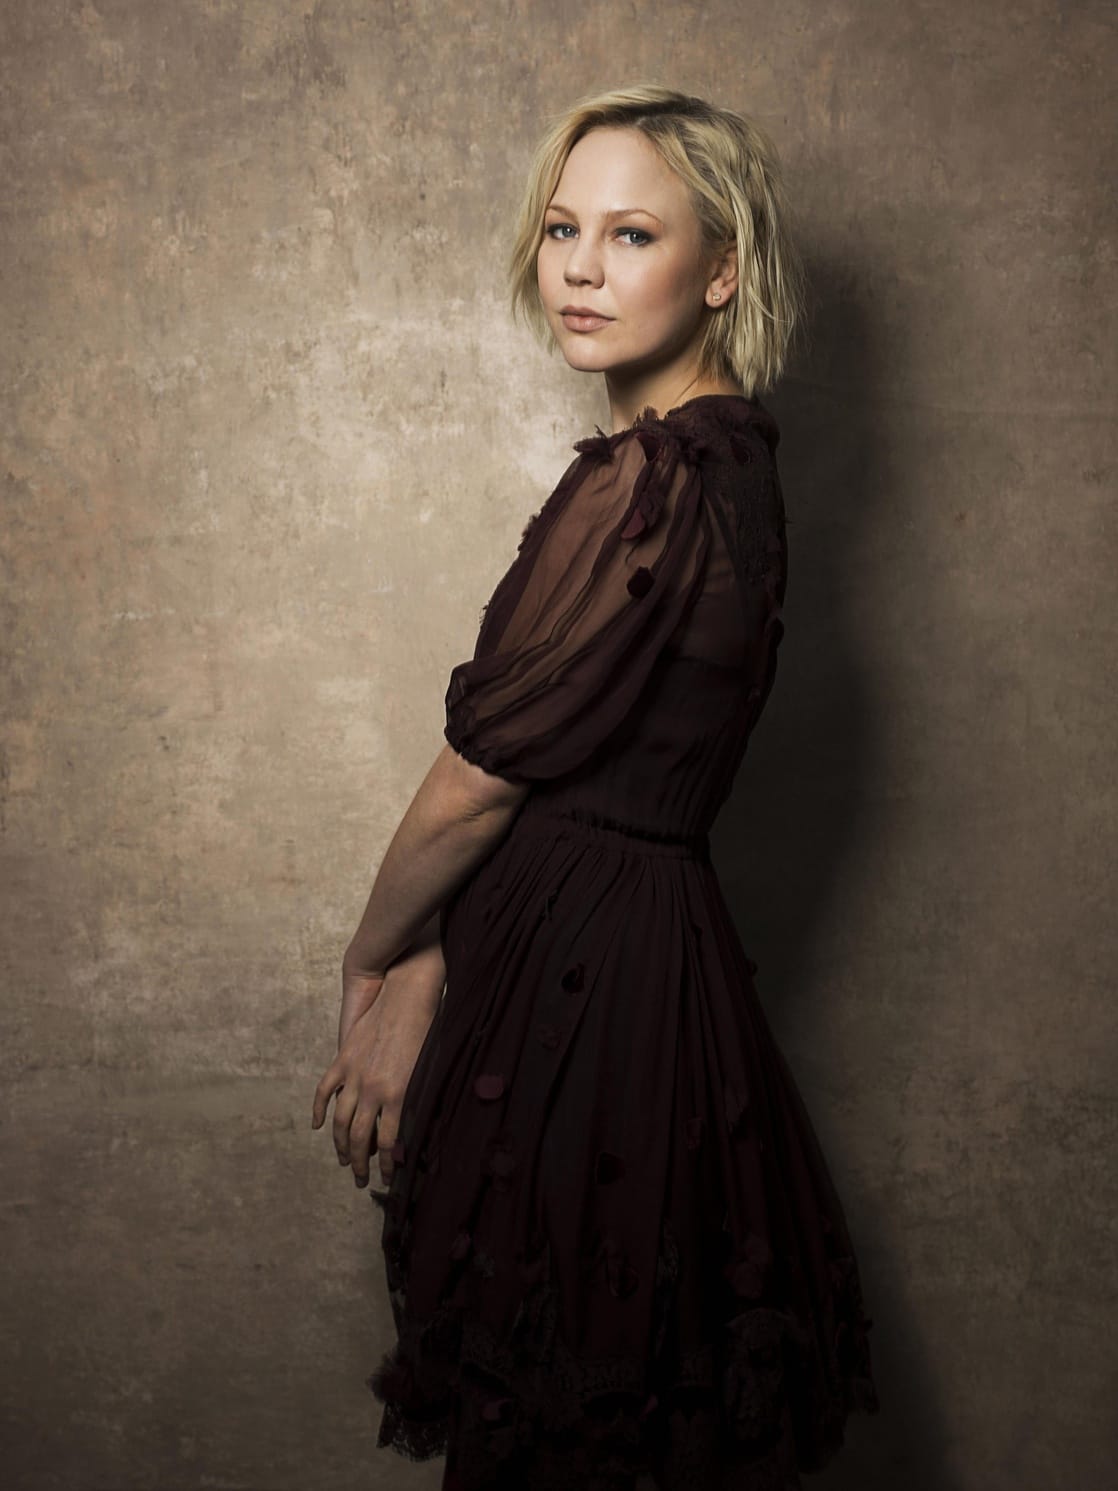 Adelaide Clemens.